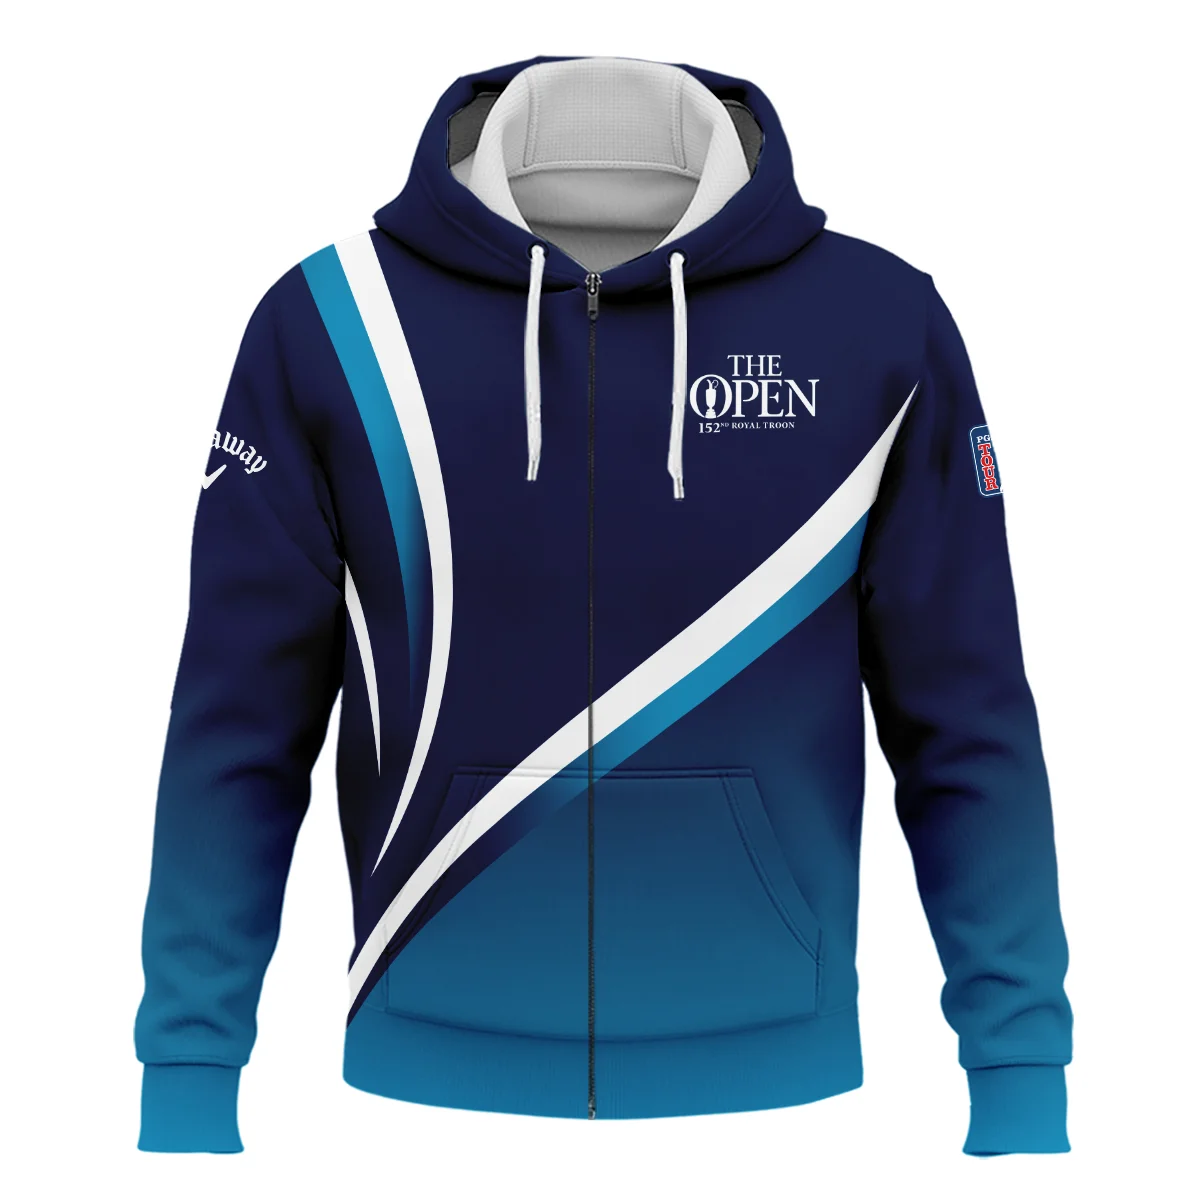 Callaway 152nd Open Championship Dark Blue Gradient White Abstract Background Zipper Hoodie Shirt All Over Prints HOTOP260624A03CLWZHD